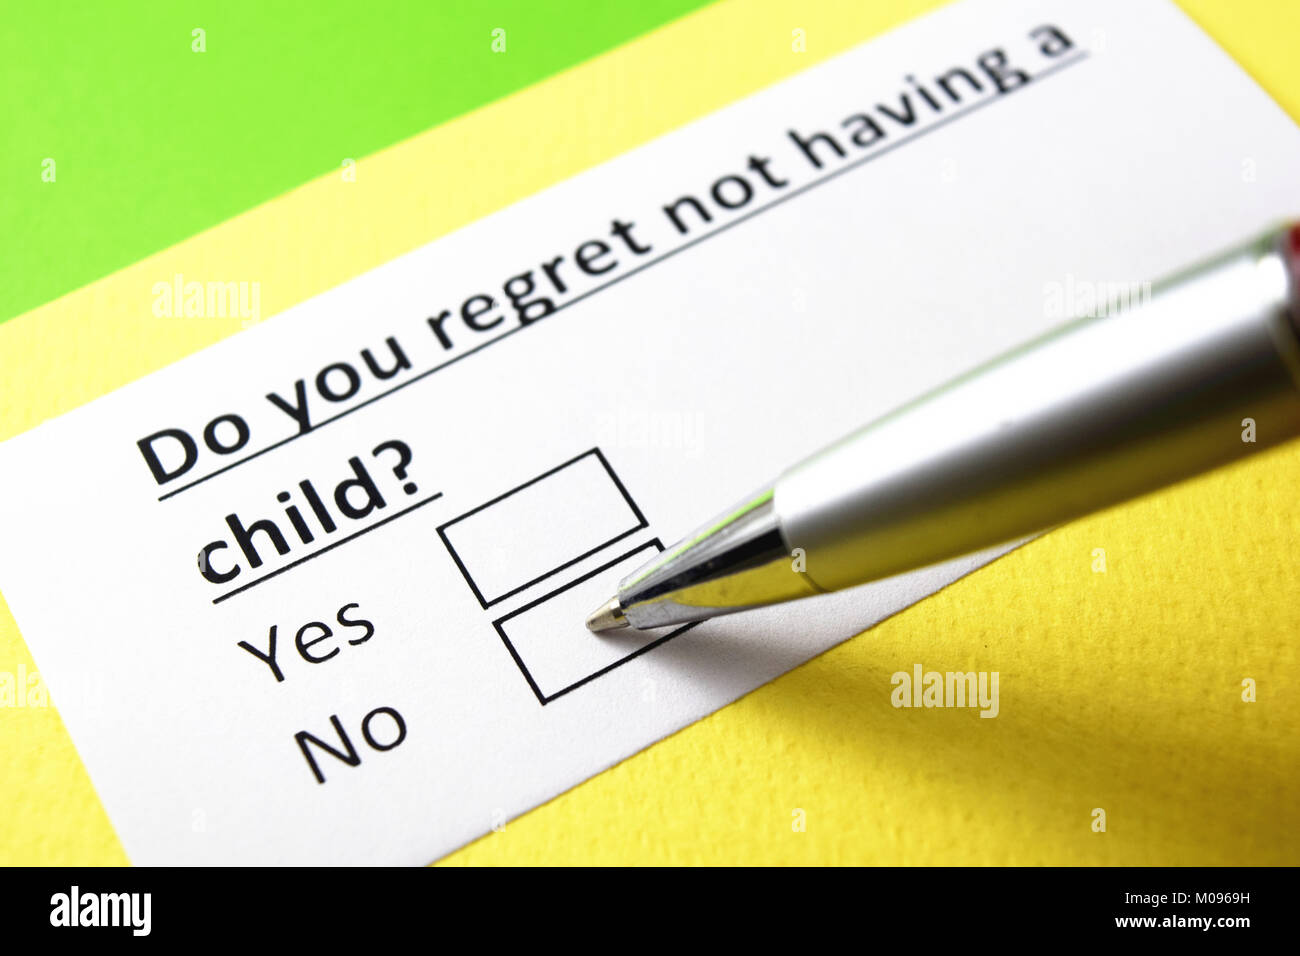 Do you regret not having a child? Yes or no? Stock Photo